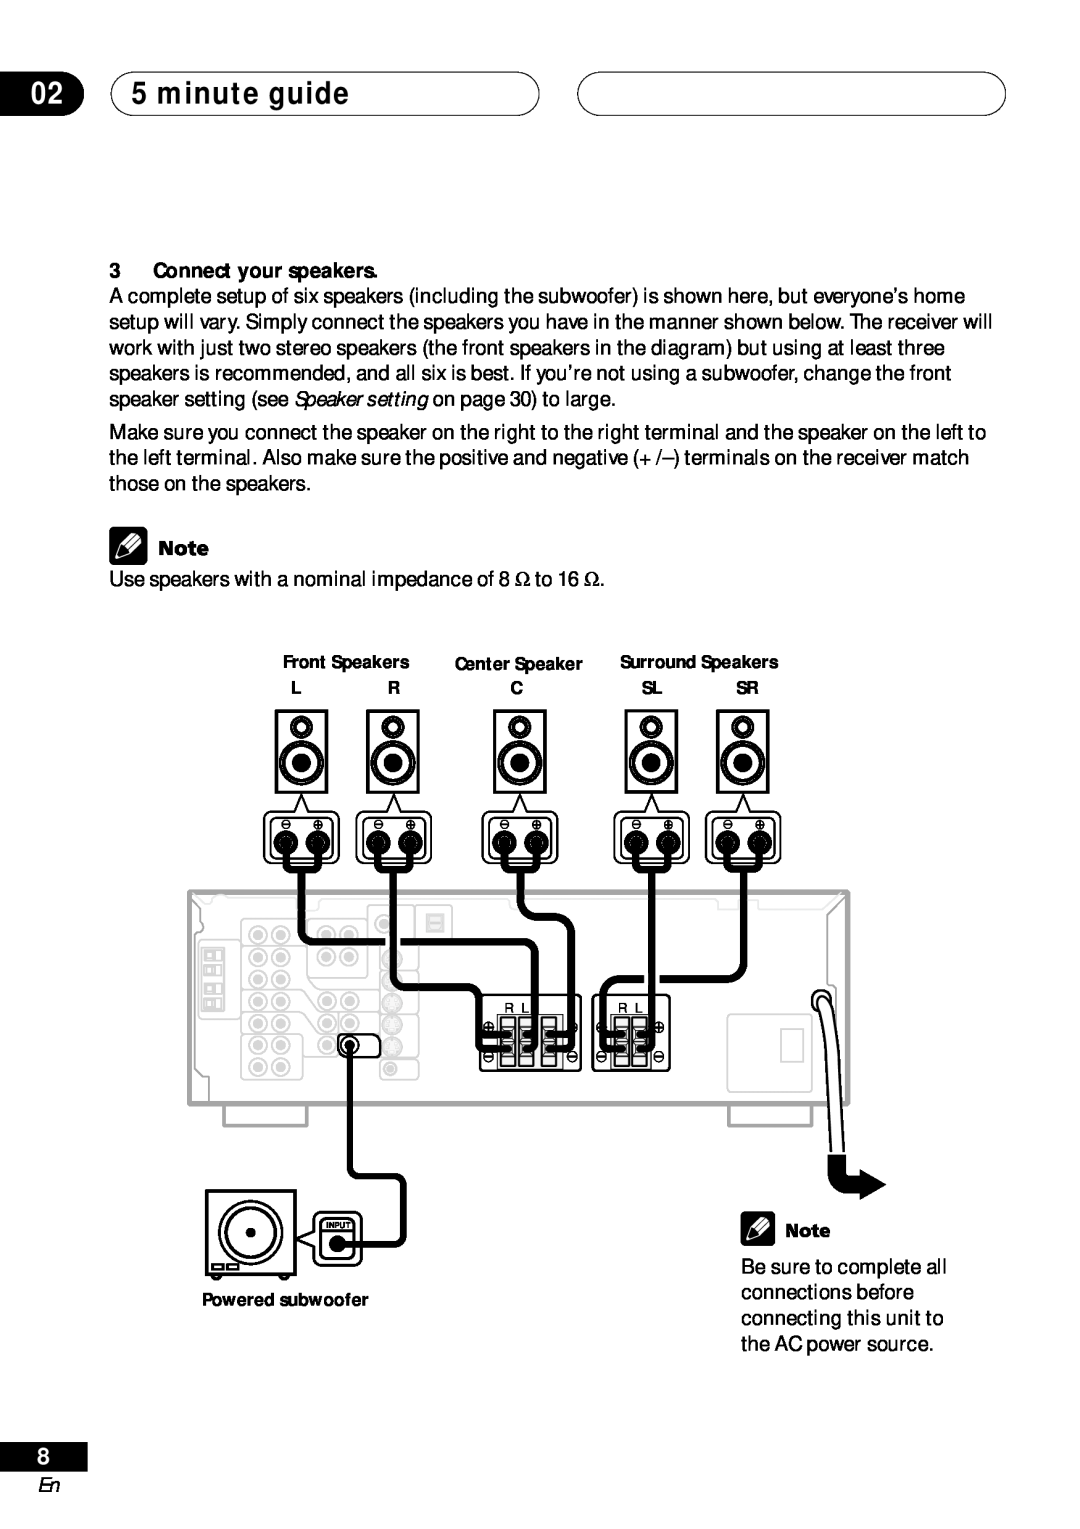 Pioneer VSX-D411 operating instructions 02 5 minute guide, Connect your speakers 